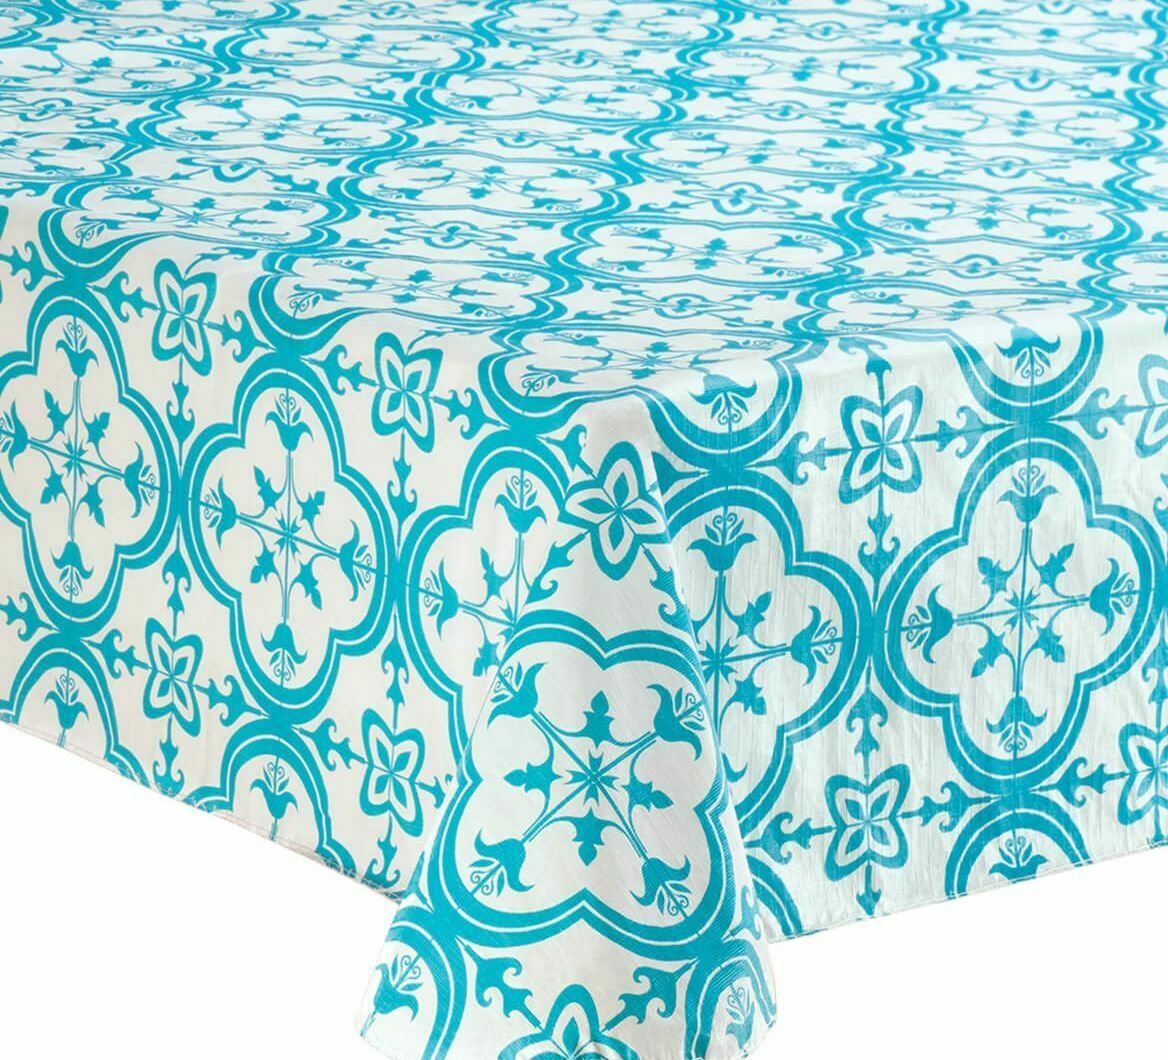 Primary image for Peva Flannel Back Tablecloth (52"x70") Oblong BLUE TILES ON WHITE by Safdie